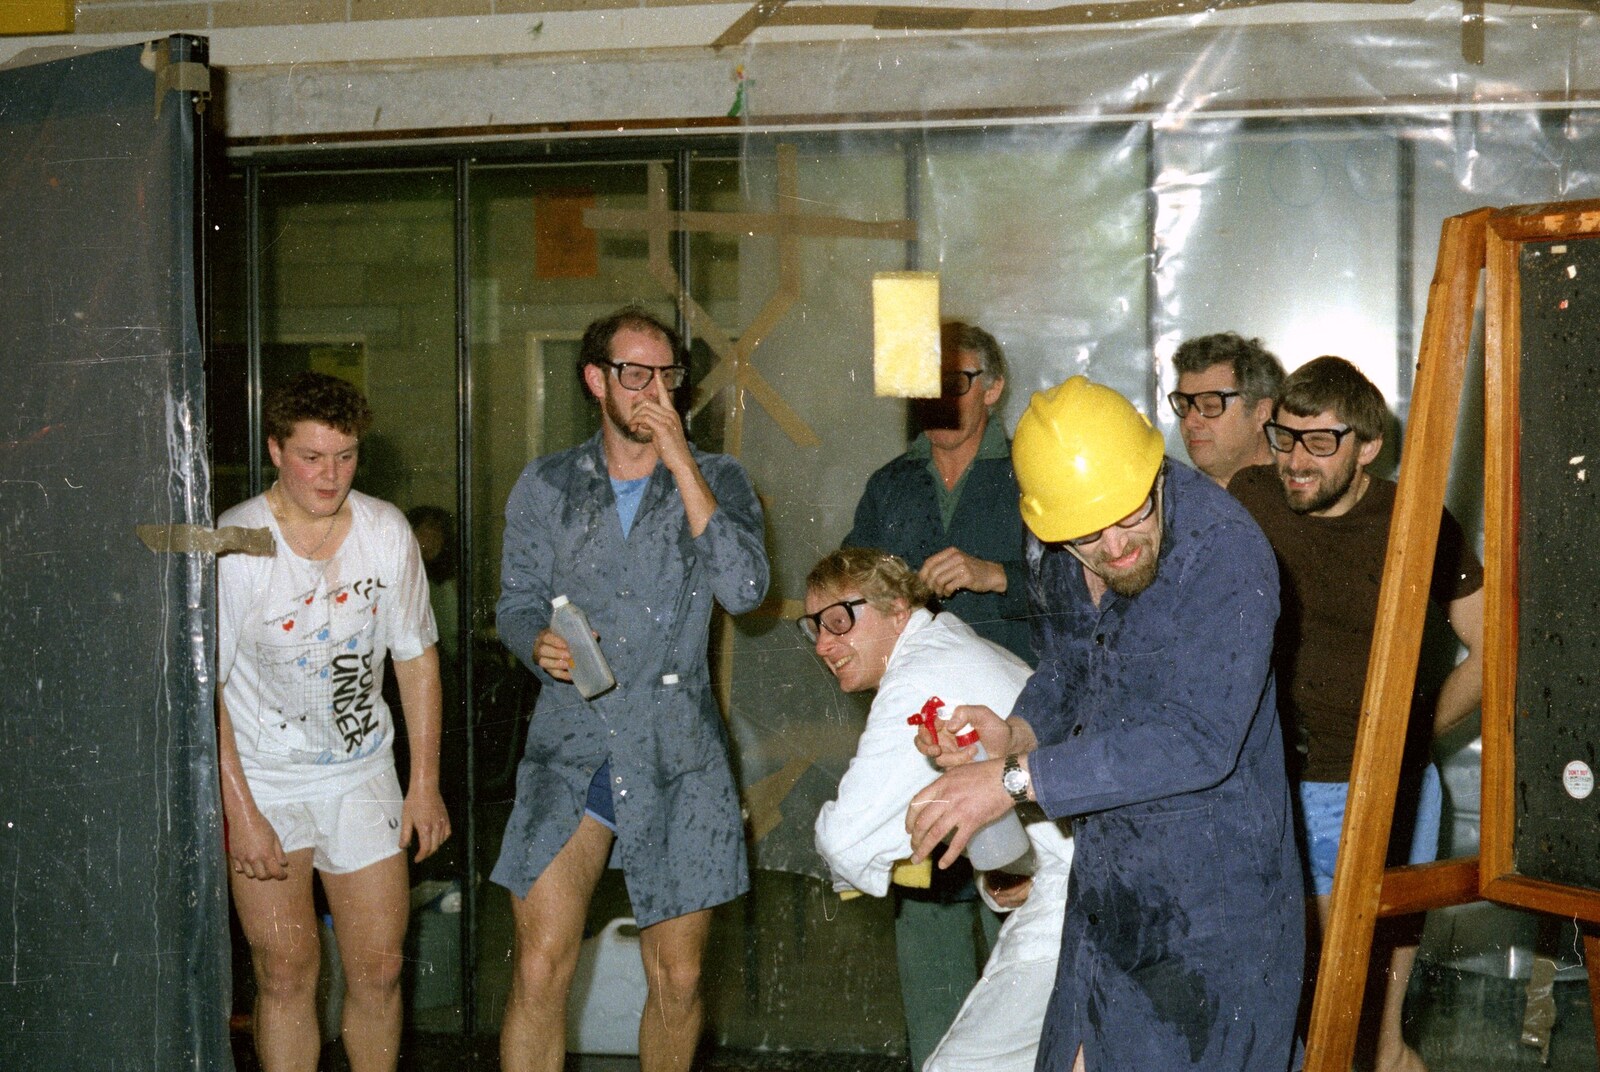 A sponge is caught in mid air from Uni: Pirate RAG Bash, Games Nights and Brian's Beard, PPSU, Plymouth - 10th February 1987